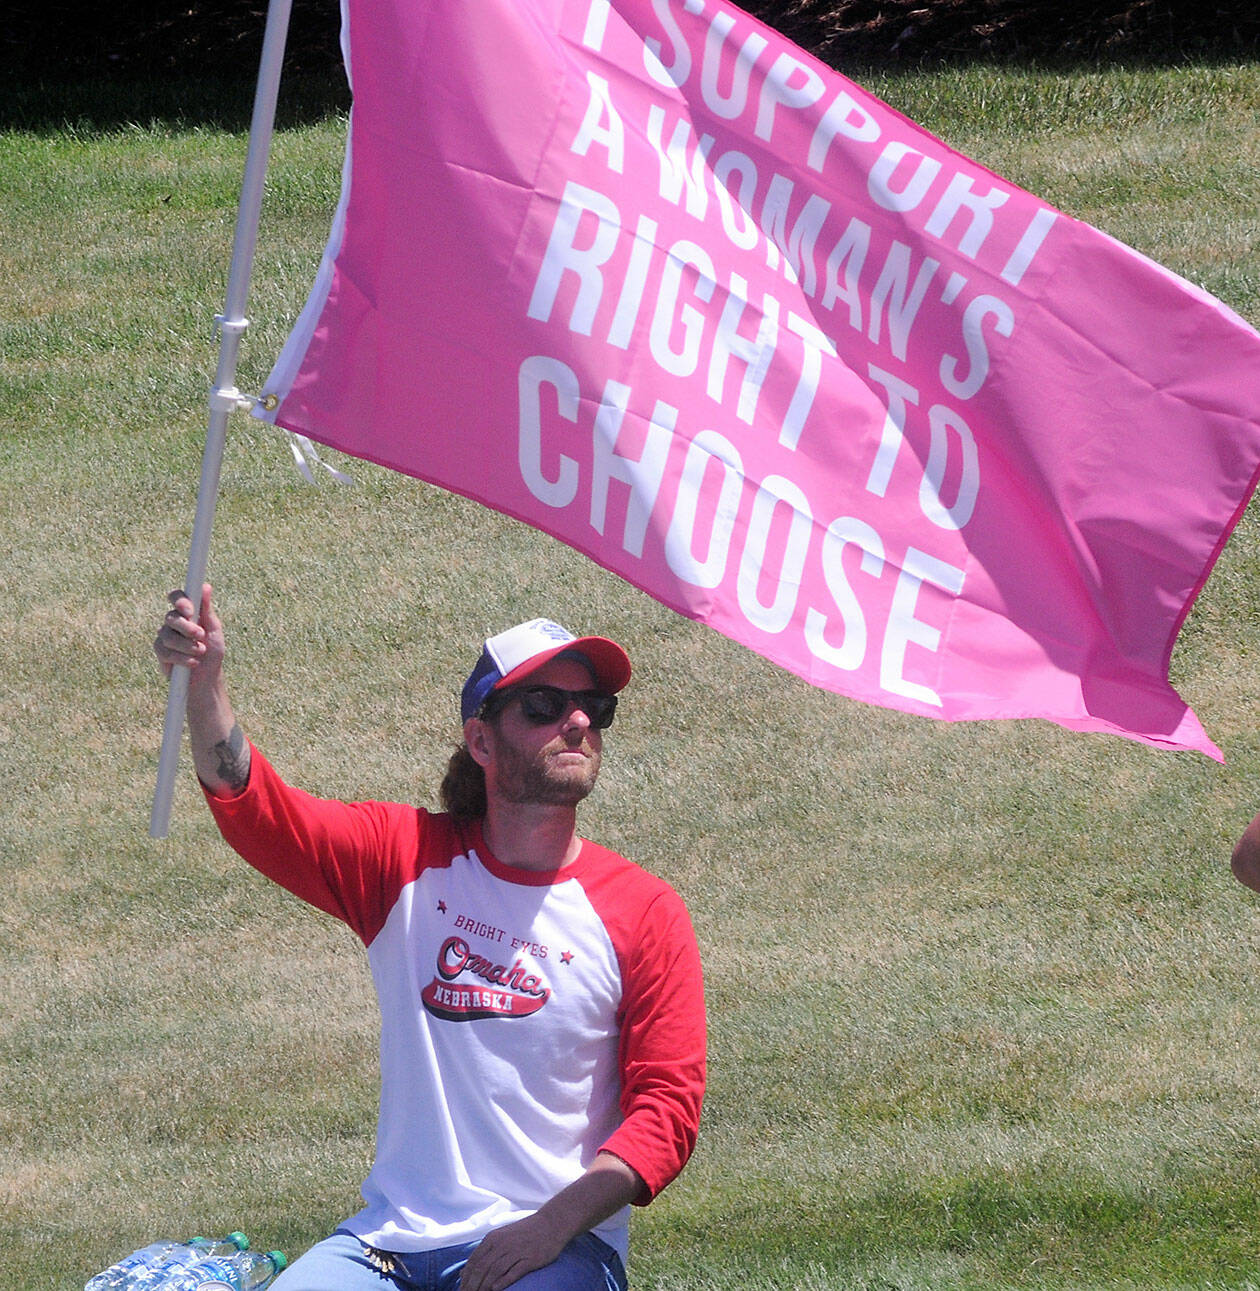 A Port Angeles man who prefers to be unidentified waves a pro-choice flag in front of the Clallam County Courthouse on Saturday. (Keith Thorpe/Peninsula Daily News)